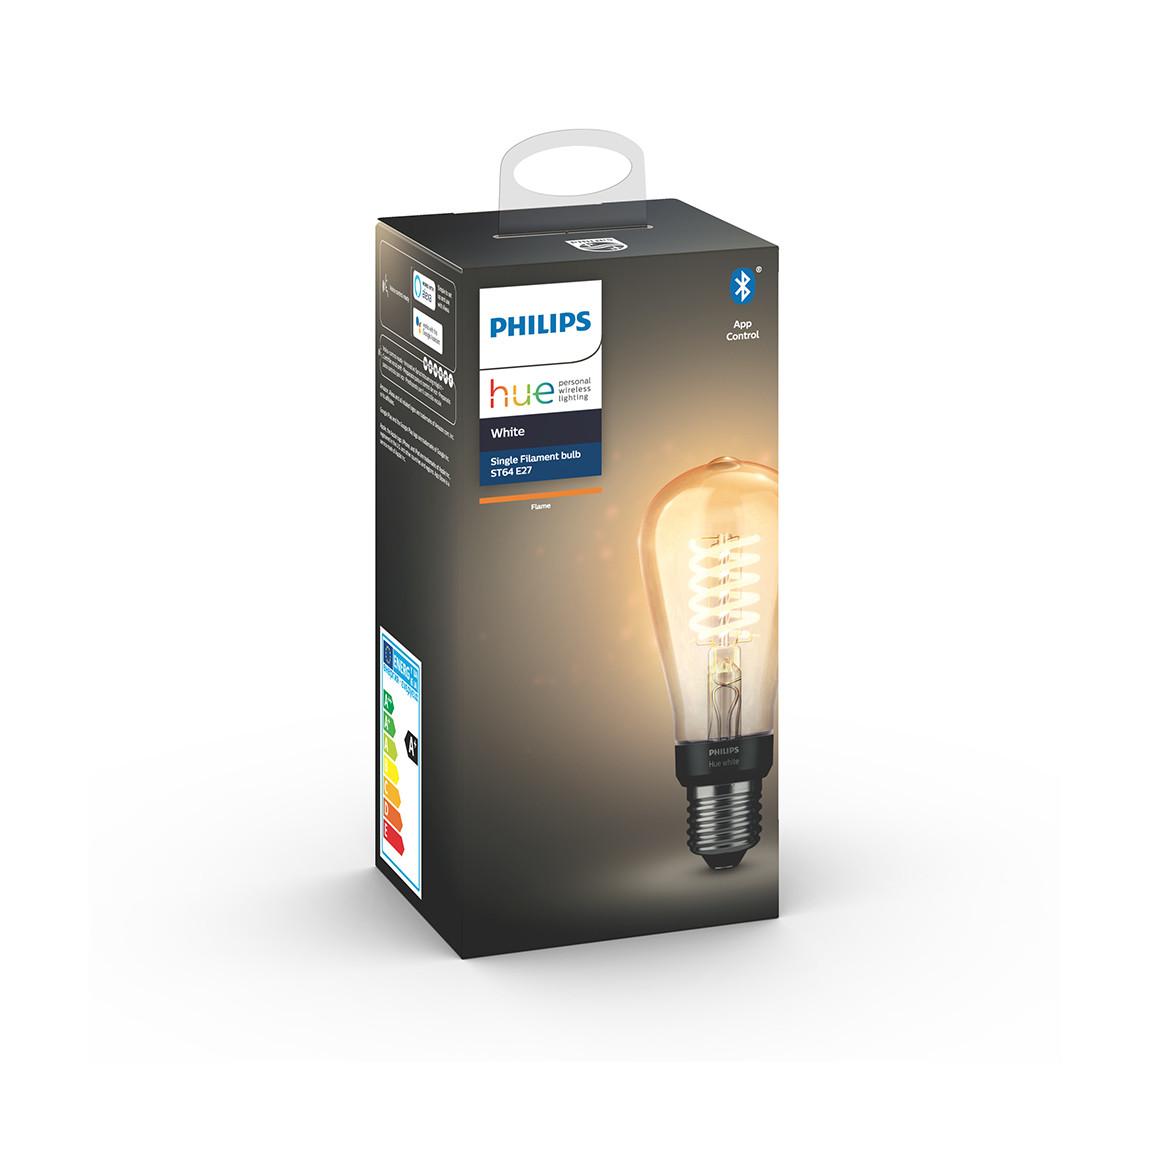 Philips Hue White Filament Edison E27 Bluetooth - Filament-Lampe - Weiß Verpackung